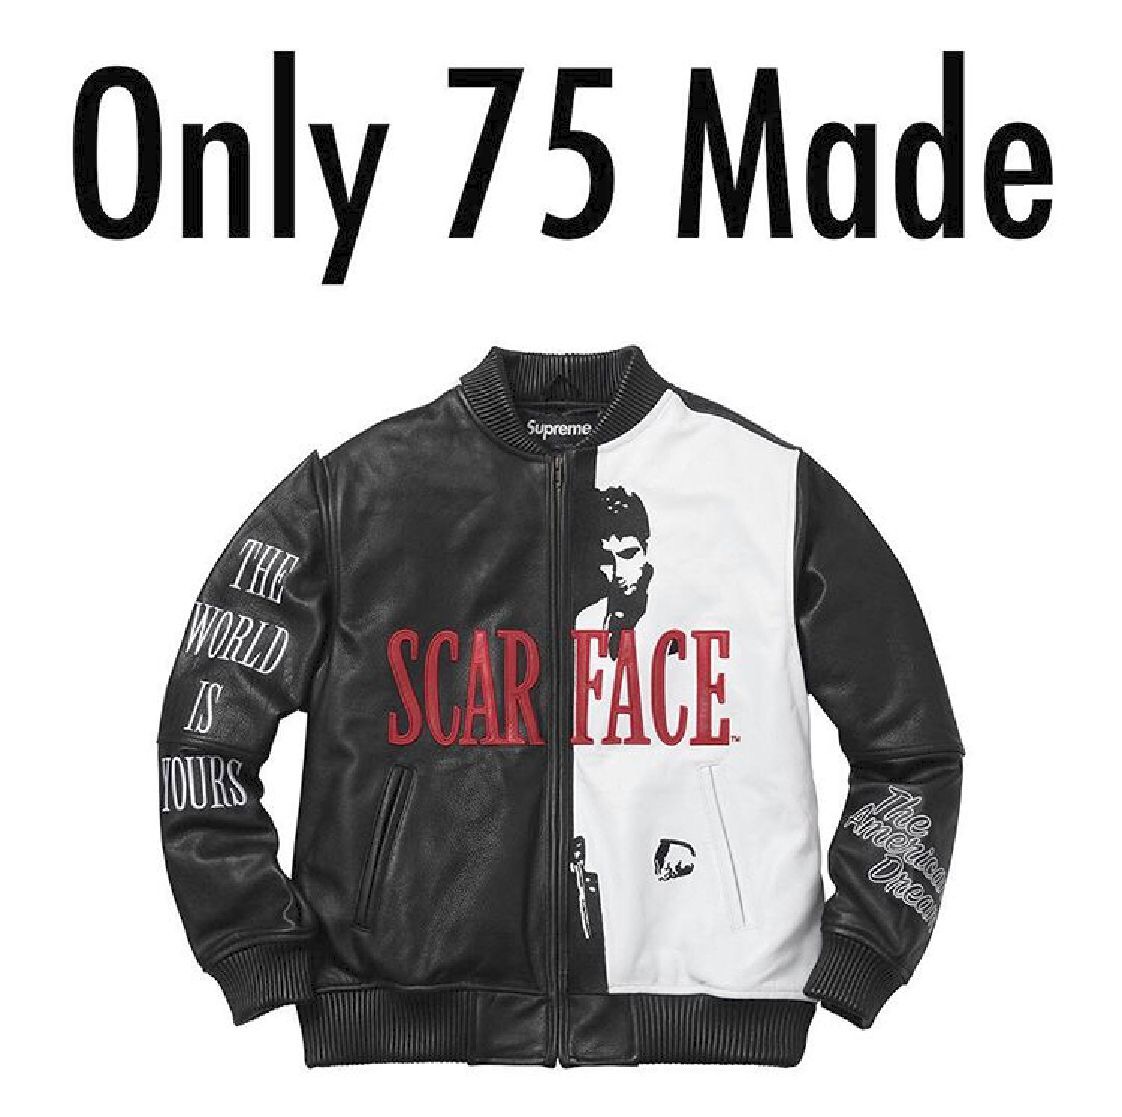 Supreme Scarface Jacket - Rumored To Only Be 75 Made